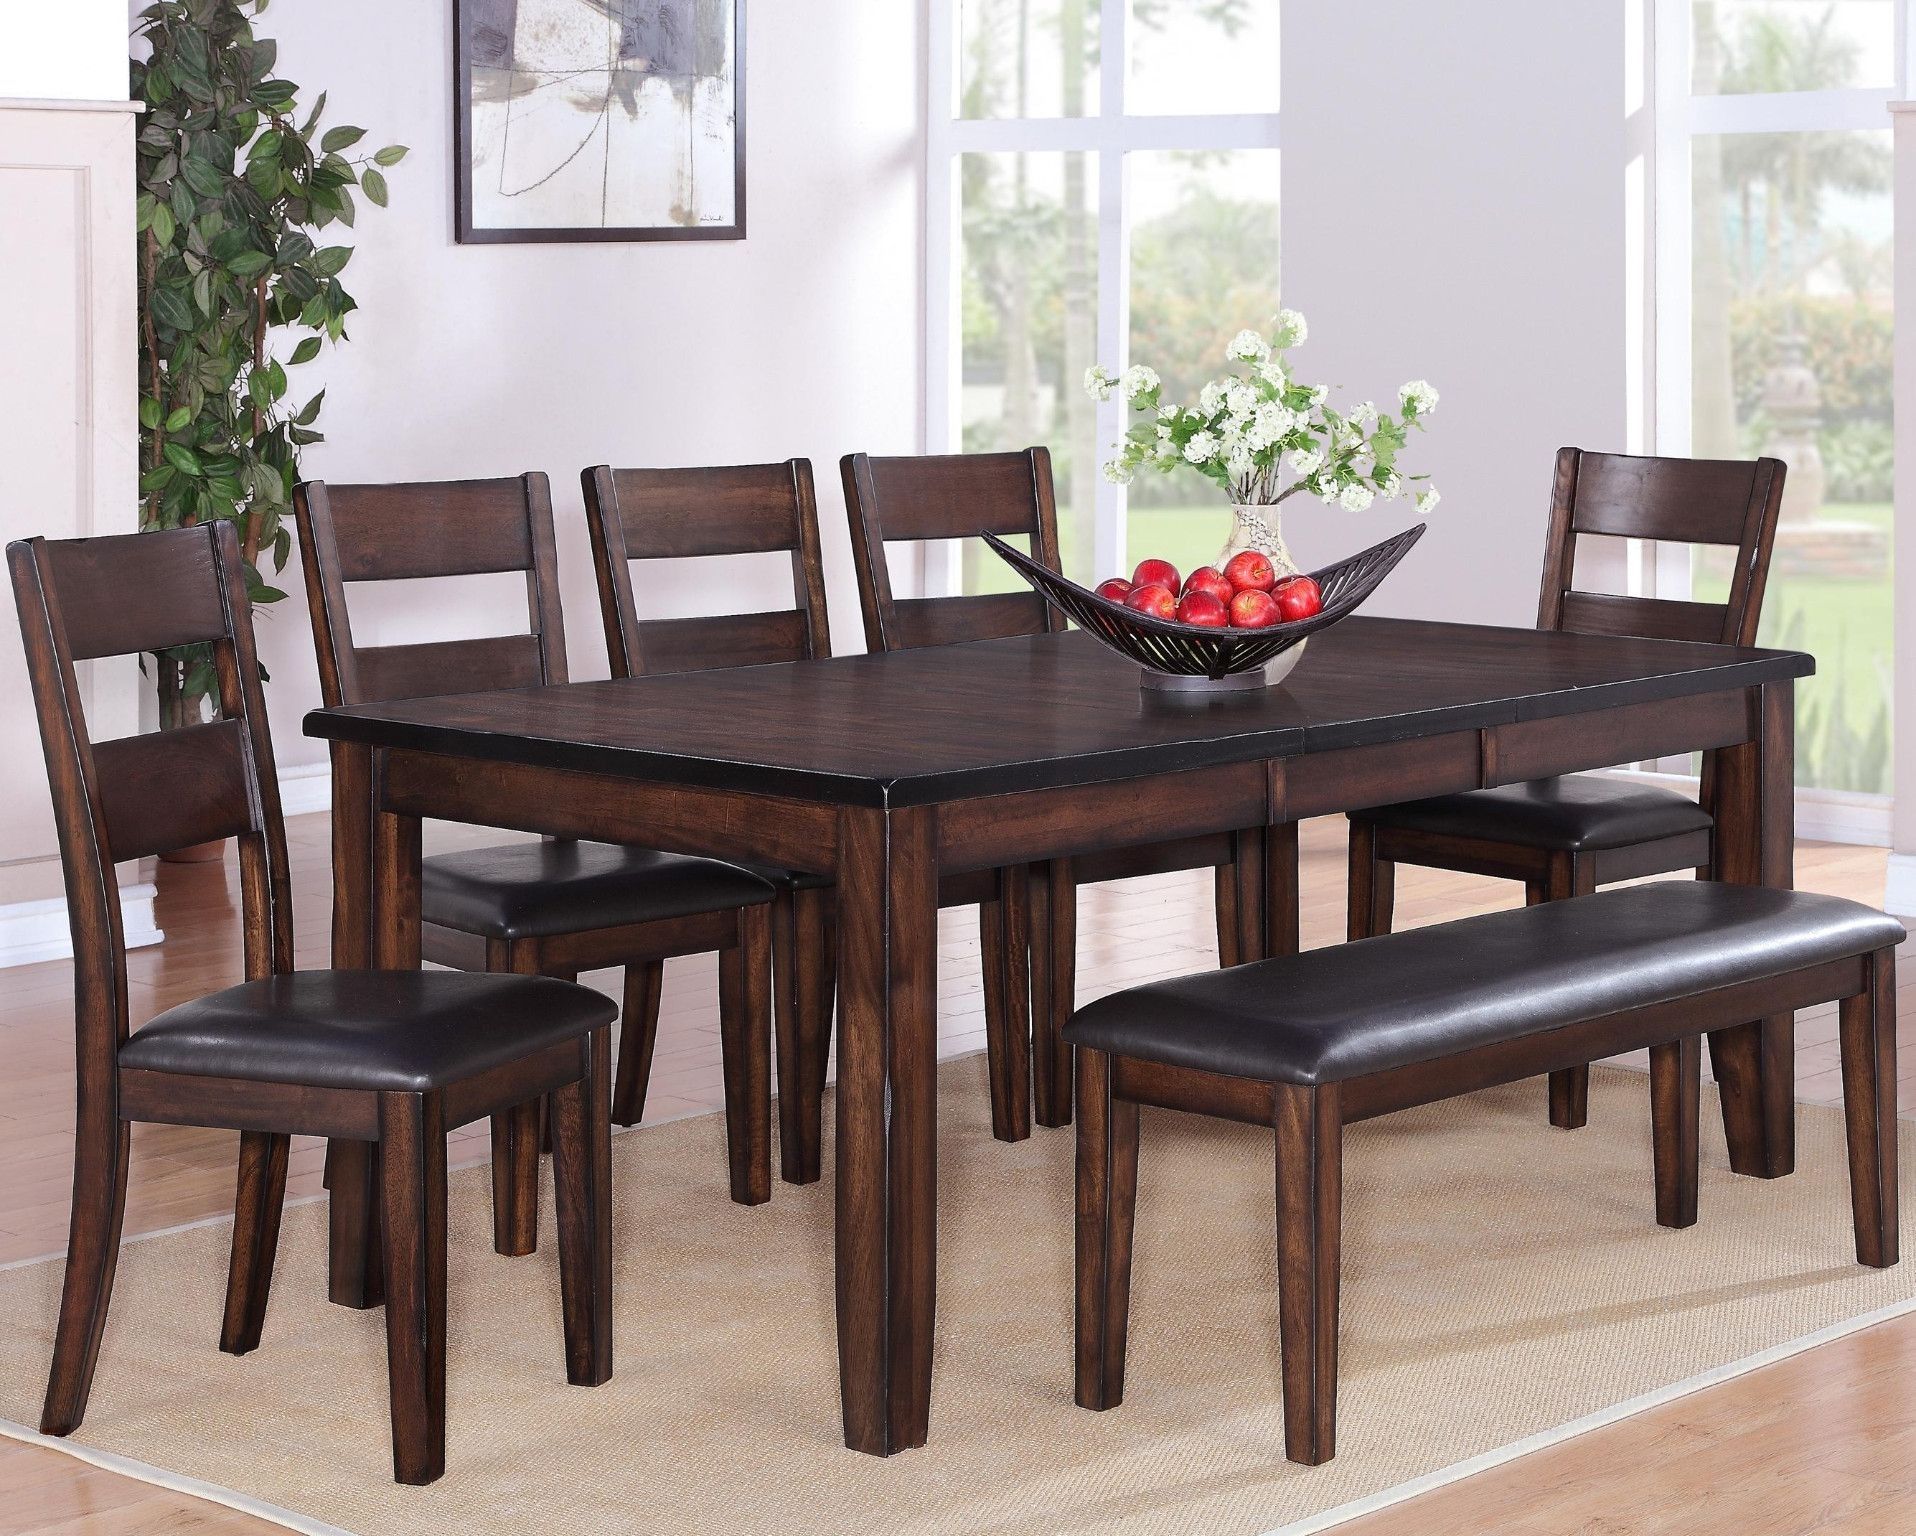 Maldives 5 Piece Dinette Table And 4 Chairs $699.00 Table $ (View 17 of 20)